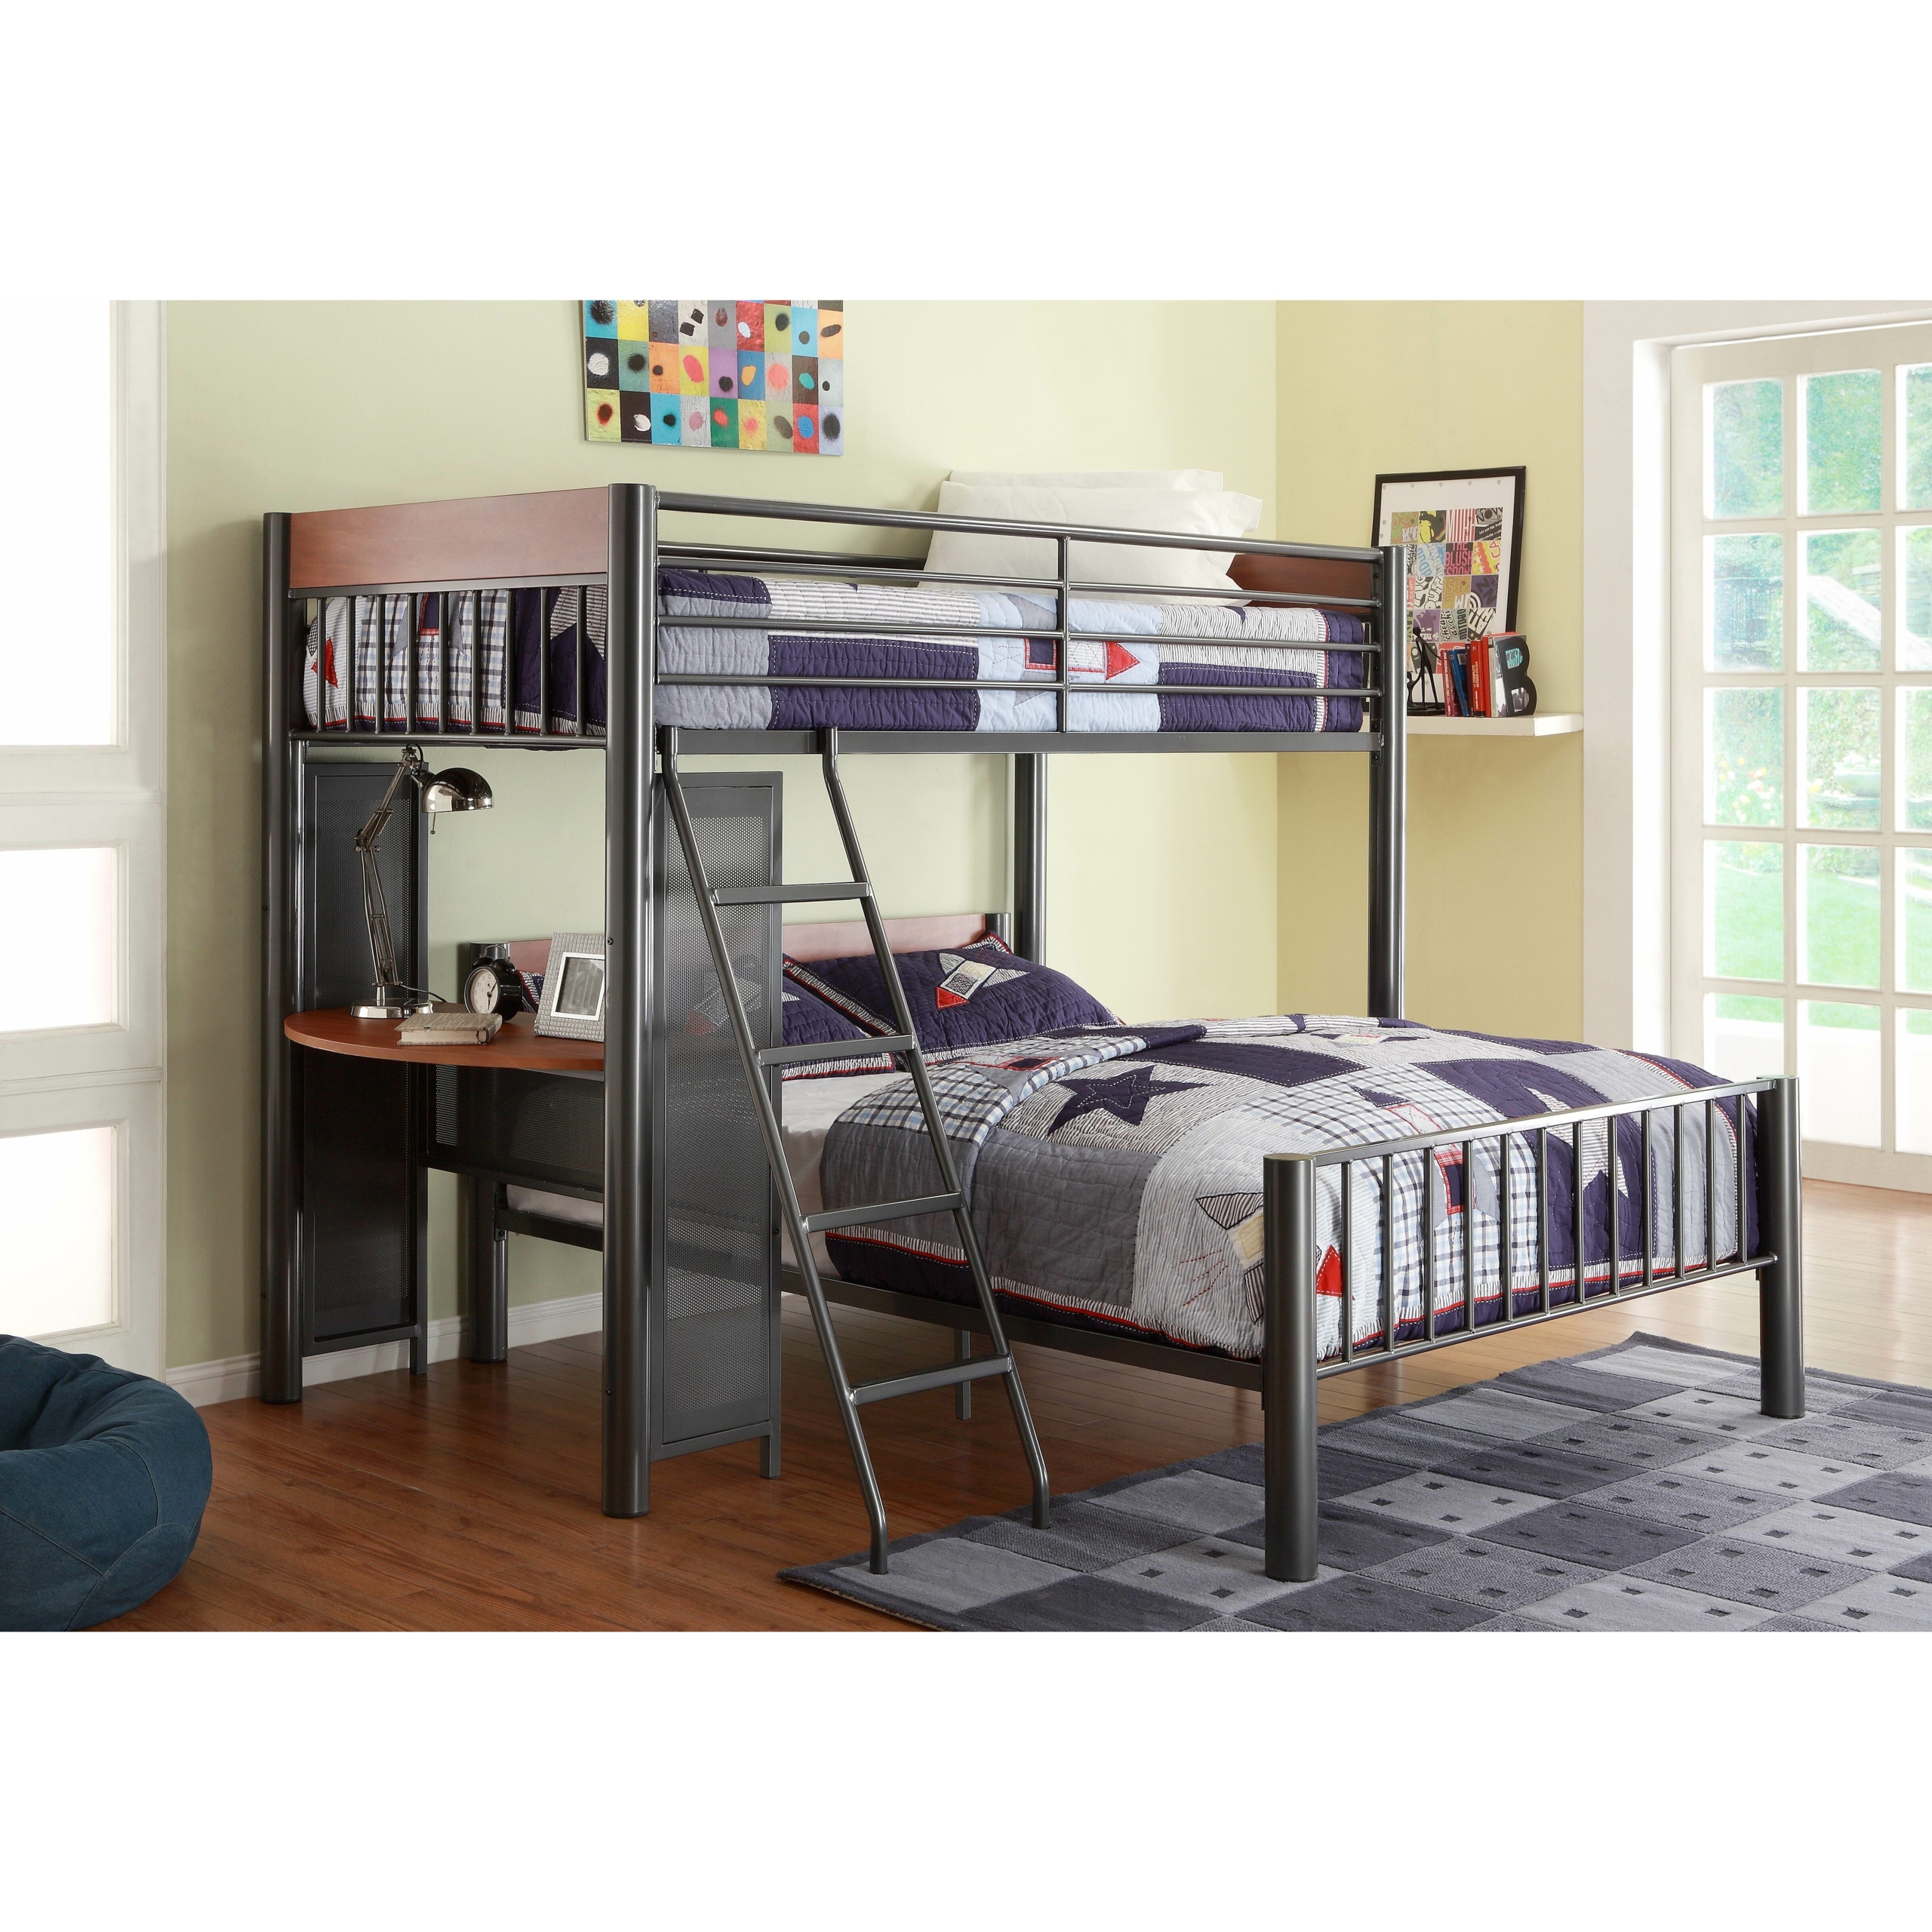 Full Over Futon Bunk Bed Visualhunt, Wayfair Twin Over Futon Bunk Bed